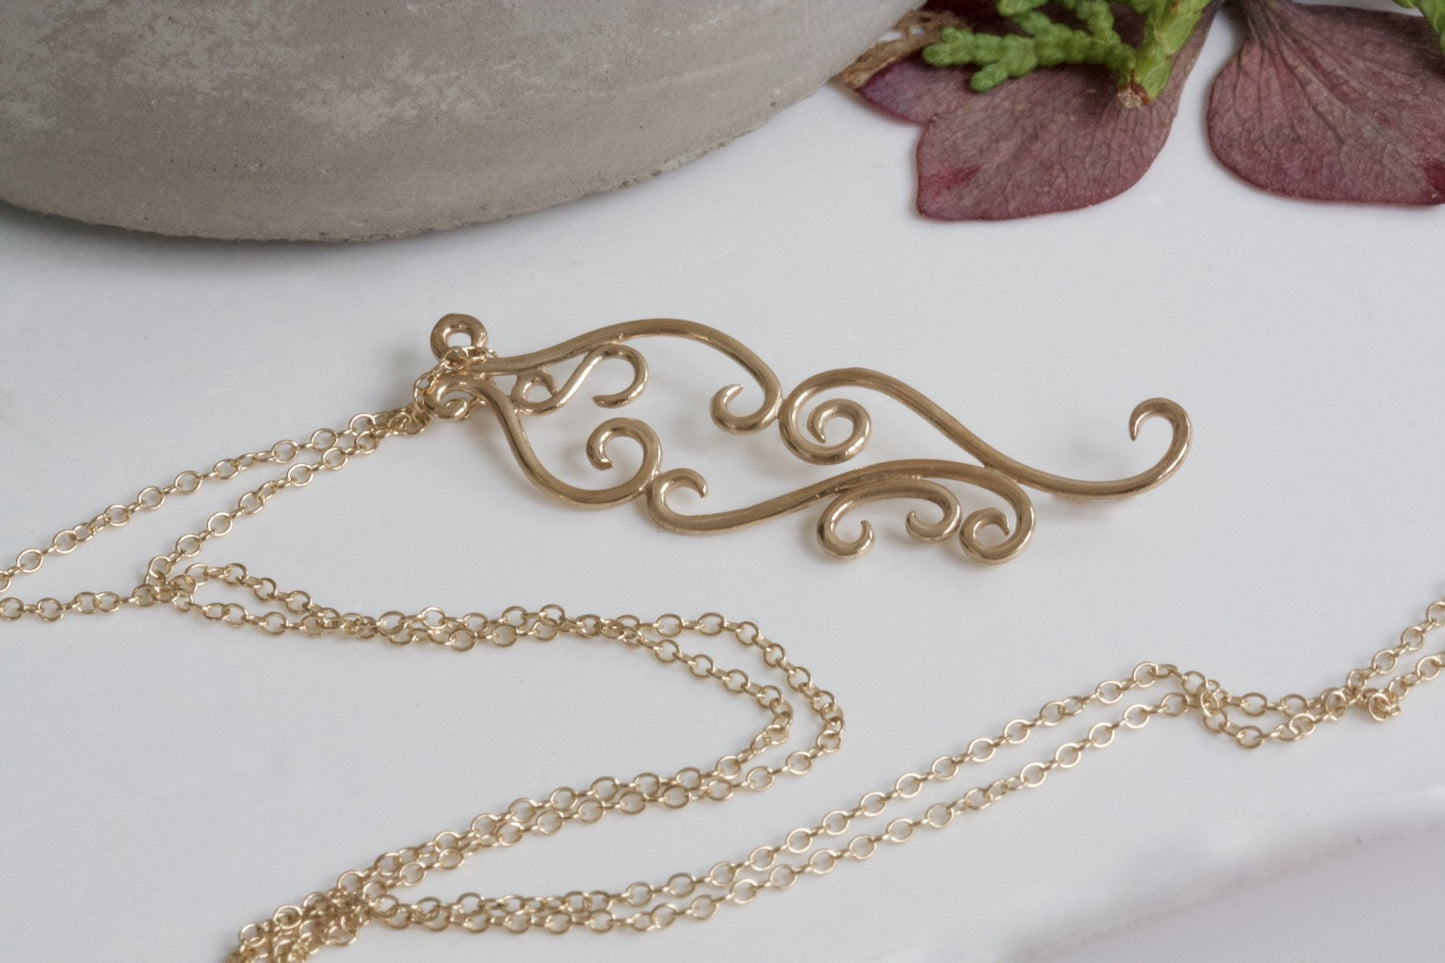 Solid 9ct Gold Vintage Inspired Romance Necklace